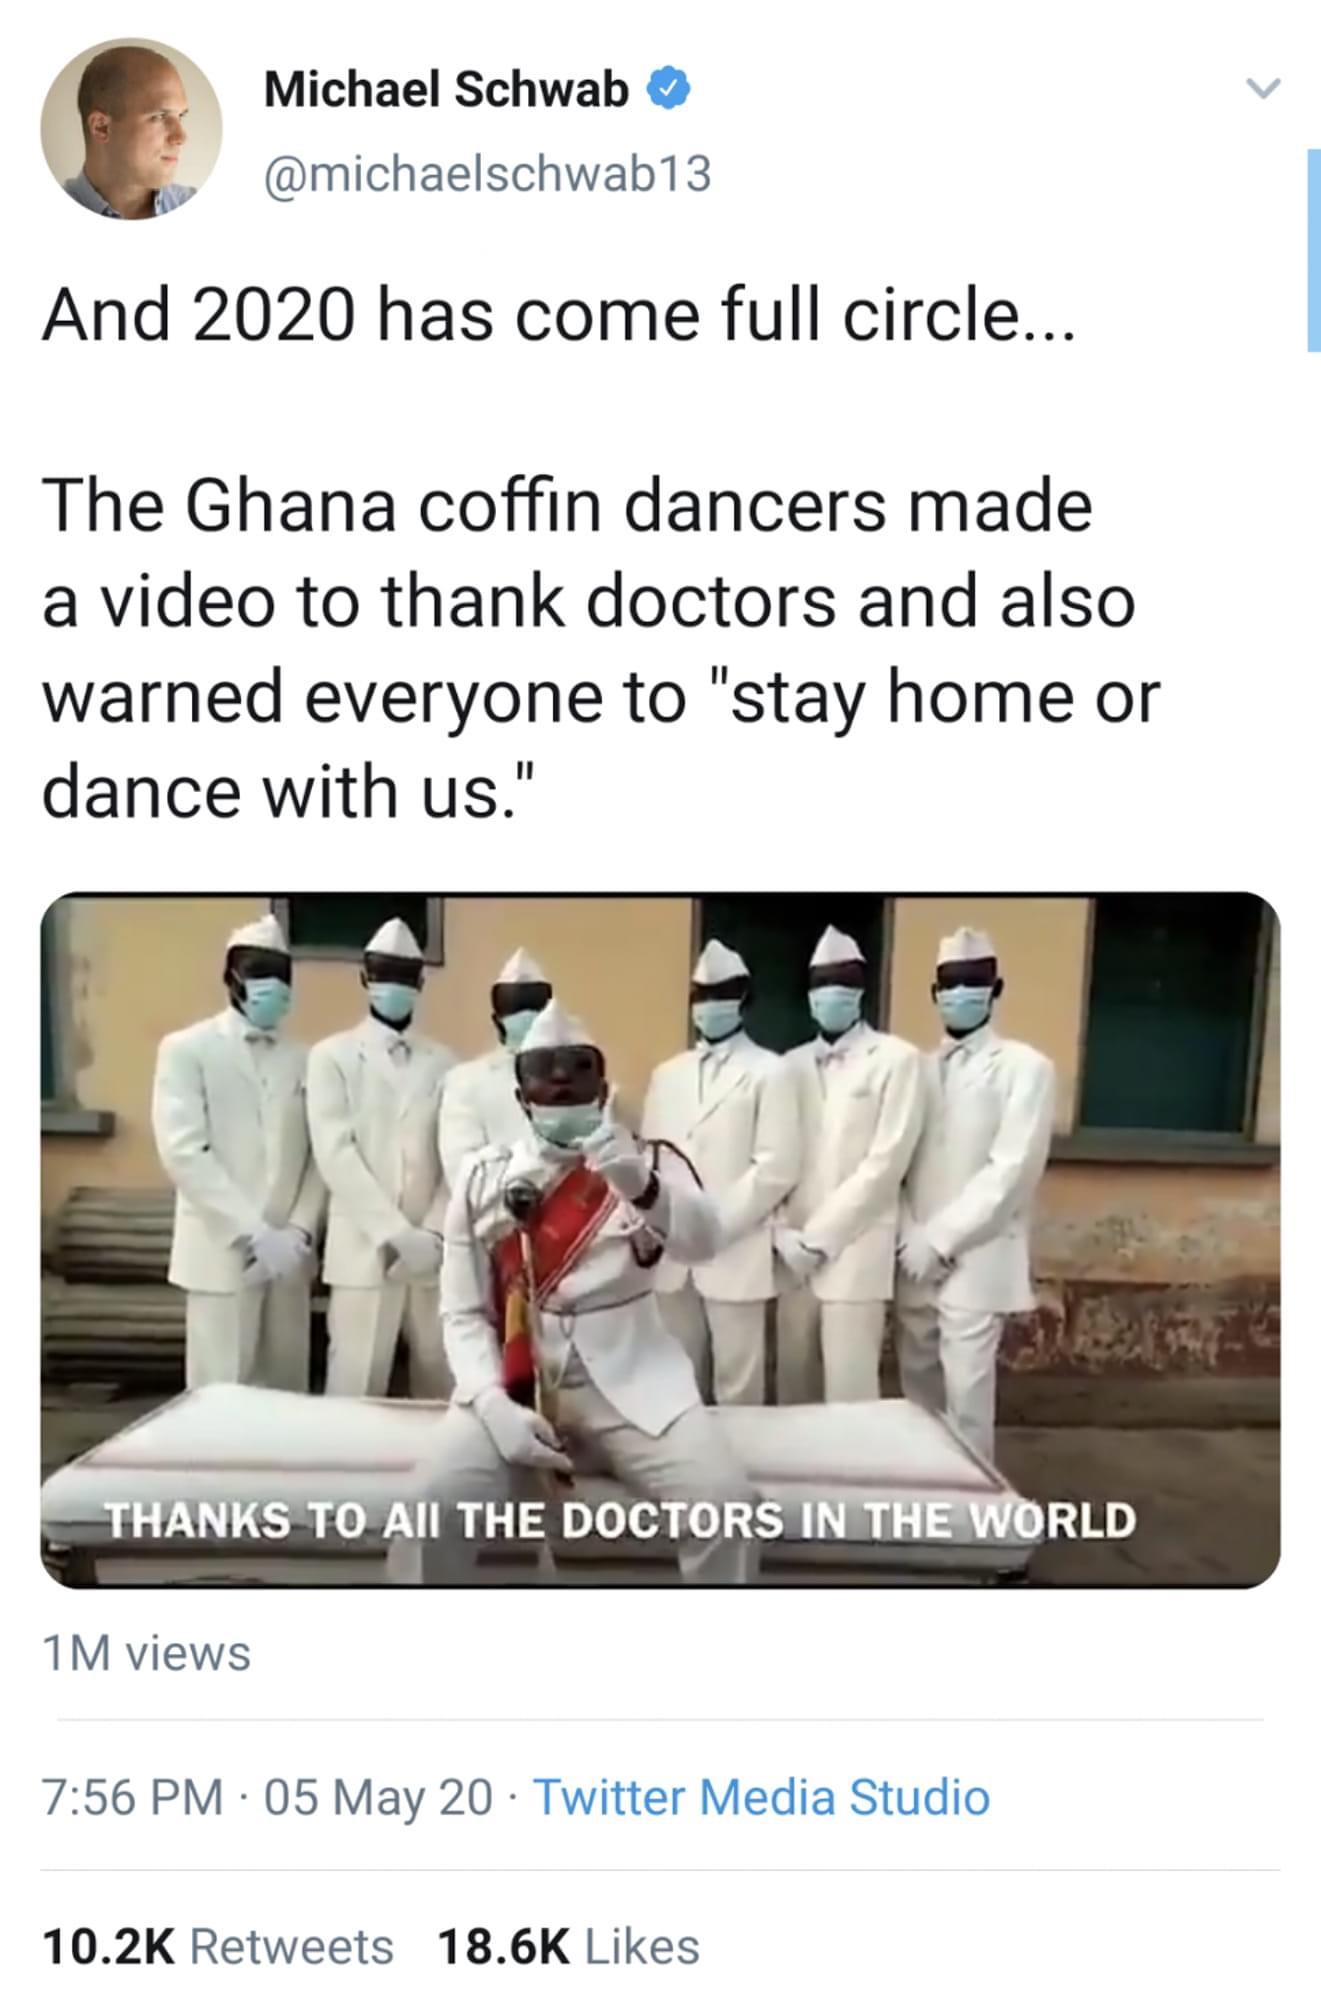 Internet meme - Michael Schwab And 2020 has come full circle... The Ghana coffin dancers made a video to thank doctors and also warned everyone to "stay home or dance with us." Thanks To All The Doctors In The World 1M views 05 May 20 Twitter Media Studio